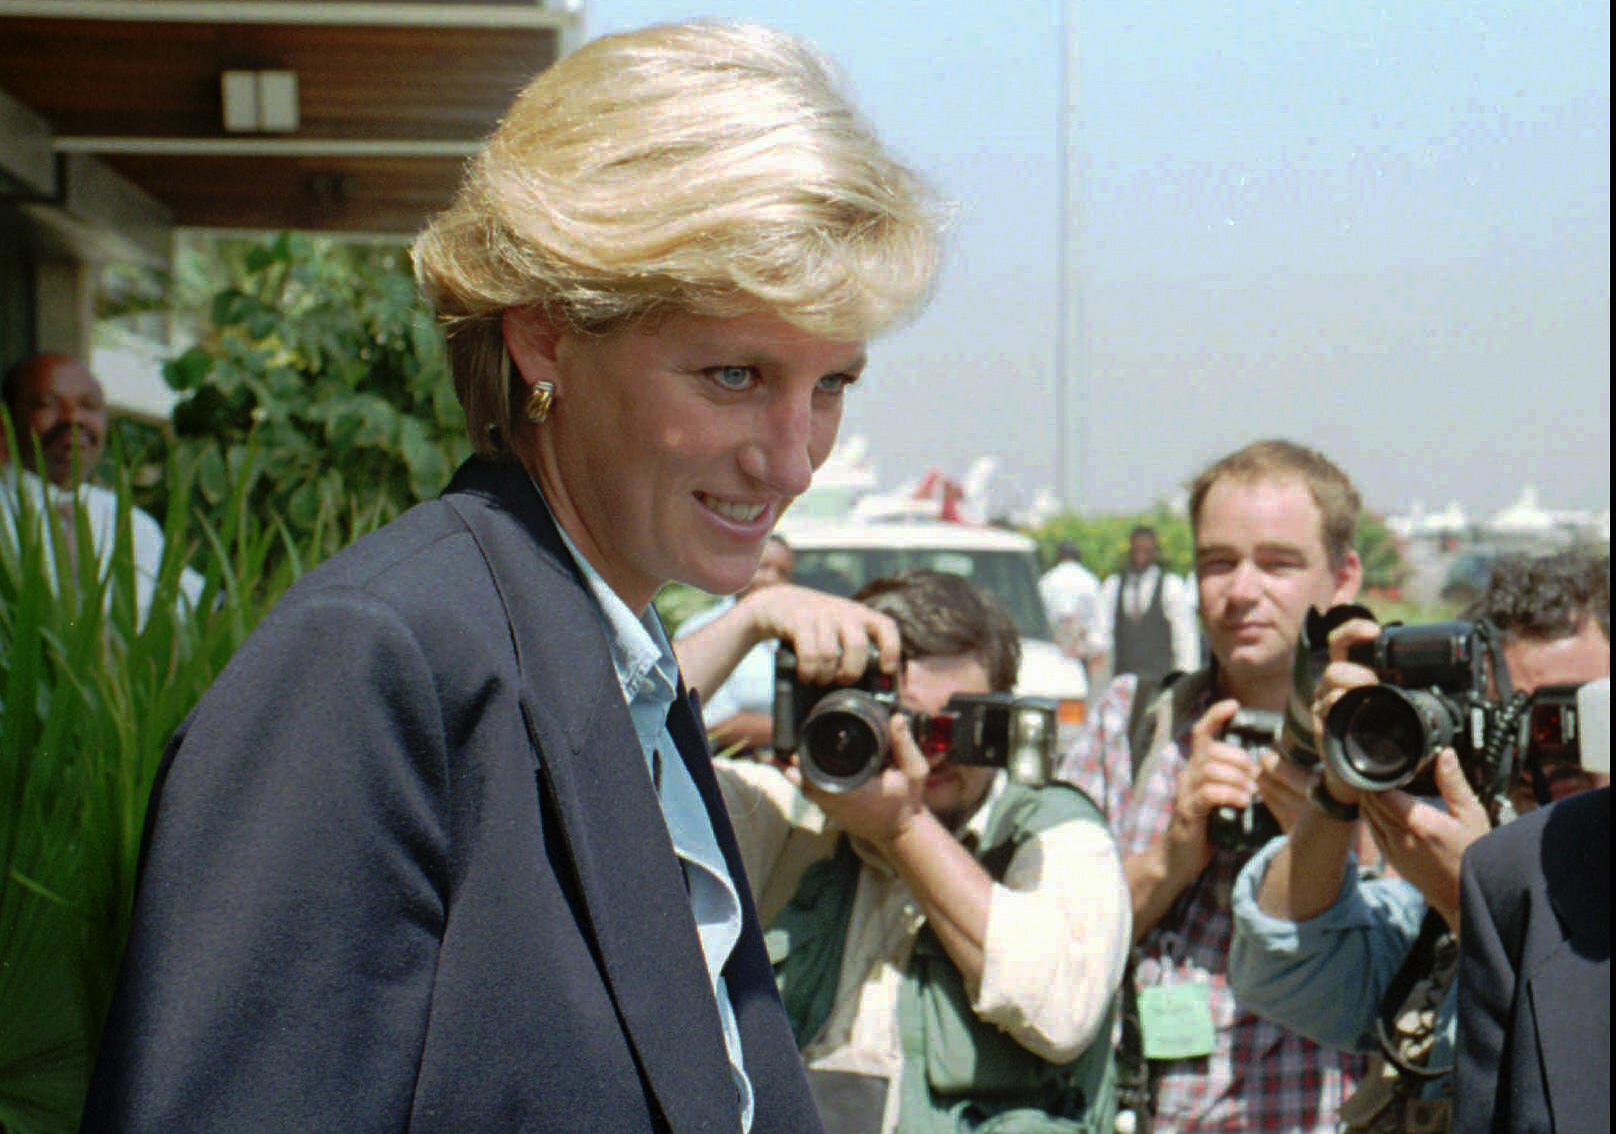 CORRECTING YEAR TO 1997 - FILE - In this Thursday, Jan. 16, 1997 file photo, Britain's Princess Diana faces photographers as she leaves Luanda airport building to board a plane to Johannesburg at the end of her four-day visit to Angola. For someone who began her life in the spotlight as “Shy Di,” Princess Diana became an unlikely, revolutionary during her years in the House of Windsor. She helped modernize the monarchy by making it more personal, changing the way the royal family related to people. By interacting more intimately with the public -- kneeling to the level of children, sitting on edge of a patient’s hospital bed, writing personal notes to her fans -- she set an example that has been followed by other royals as the monarchy worked to become more human and remain relevant in the 21st century. (AP Photo/Giovanni Deffidenti, File)